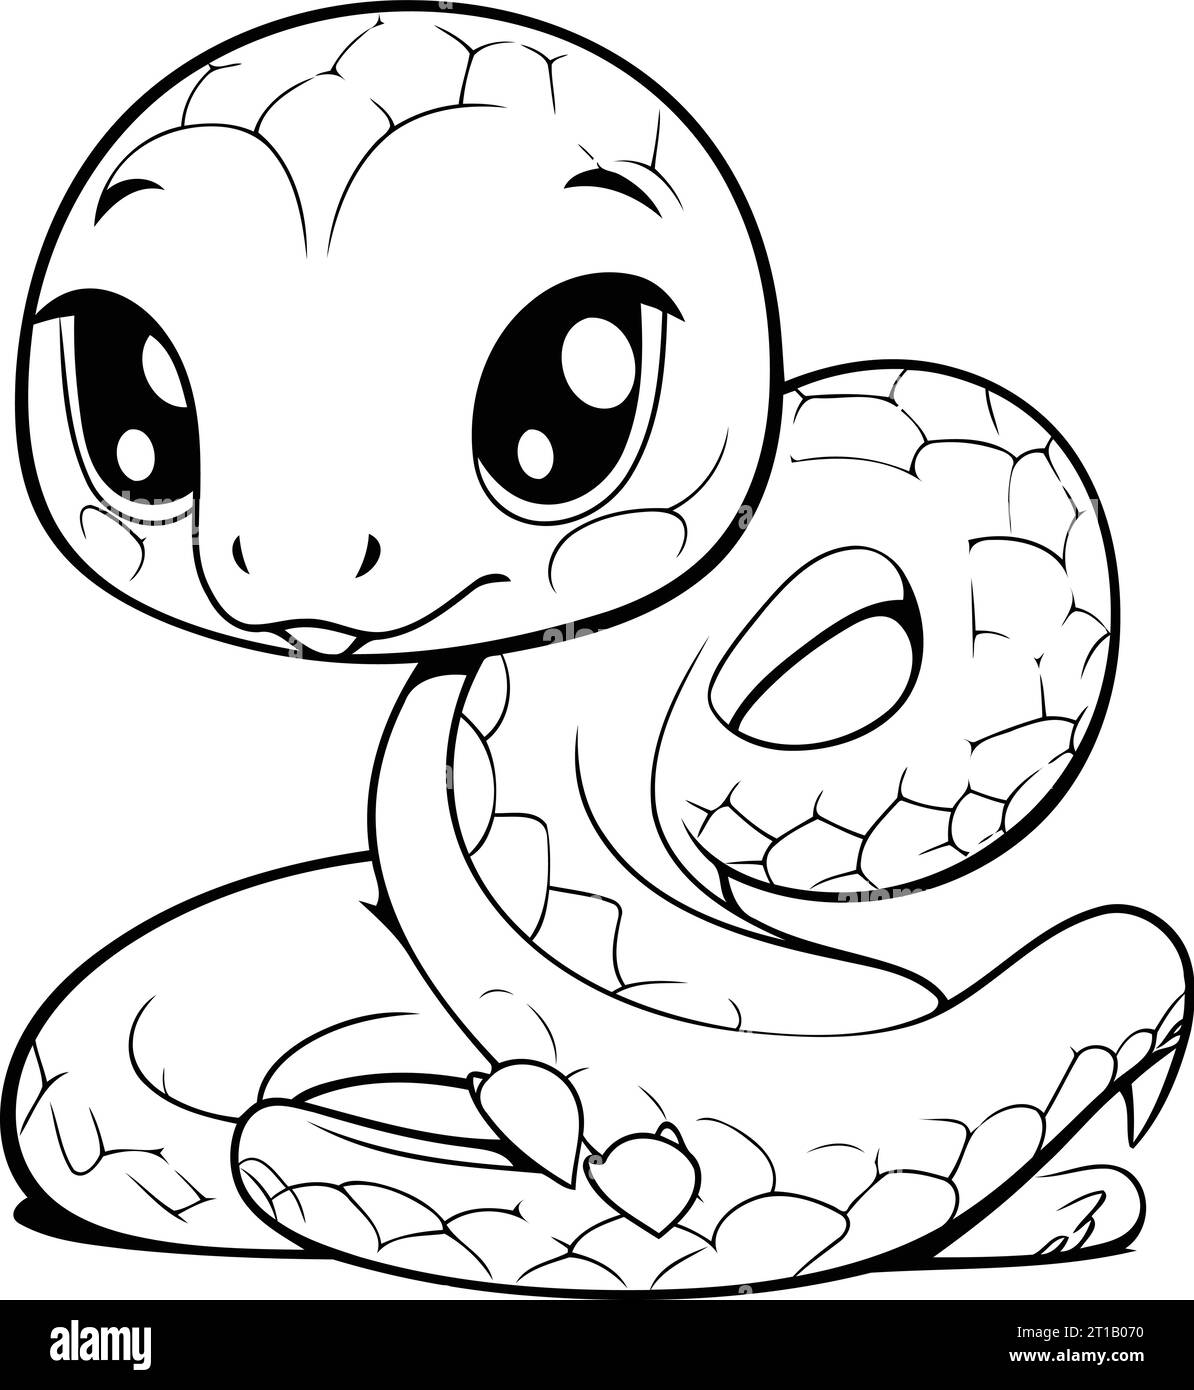 Cute cartoon snake isolated on white background. Vector illustration for coloring book. Stock Vector